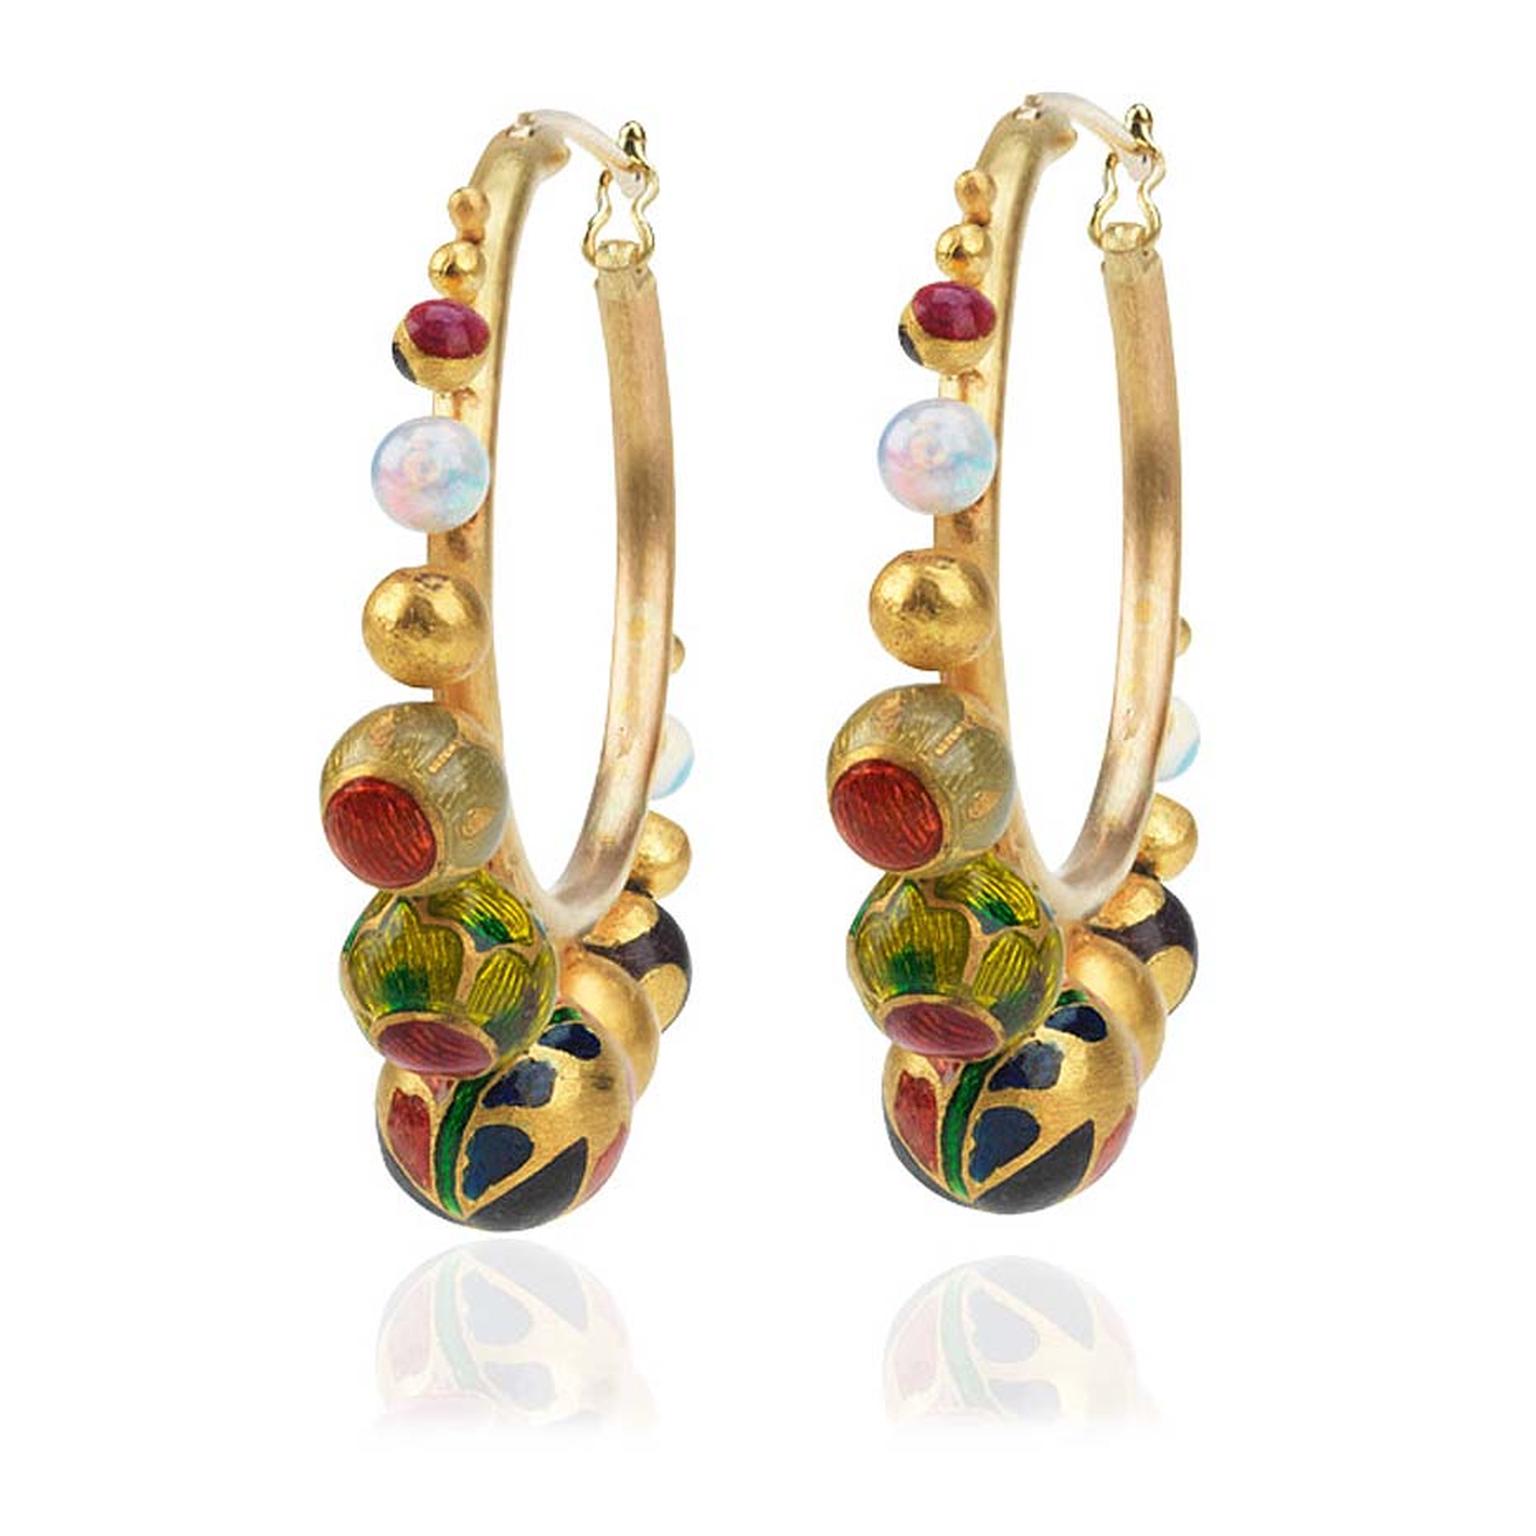 Alice Cicolini Kimono brushed yellow gold and enamel hoop earrings with graduating gold balls decorated with enamel patterns and polished white opal spheres. £3600.